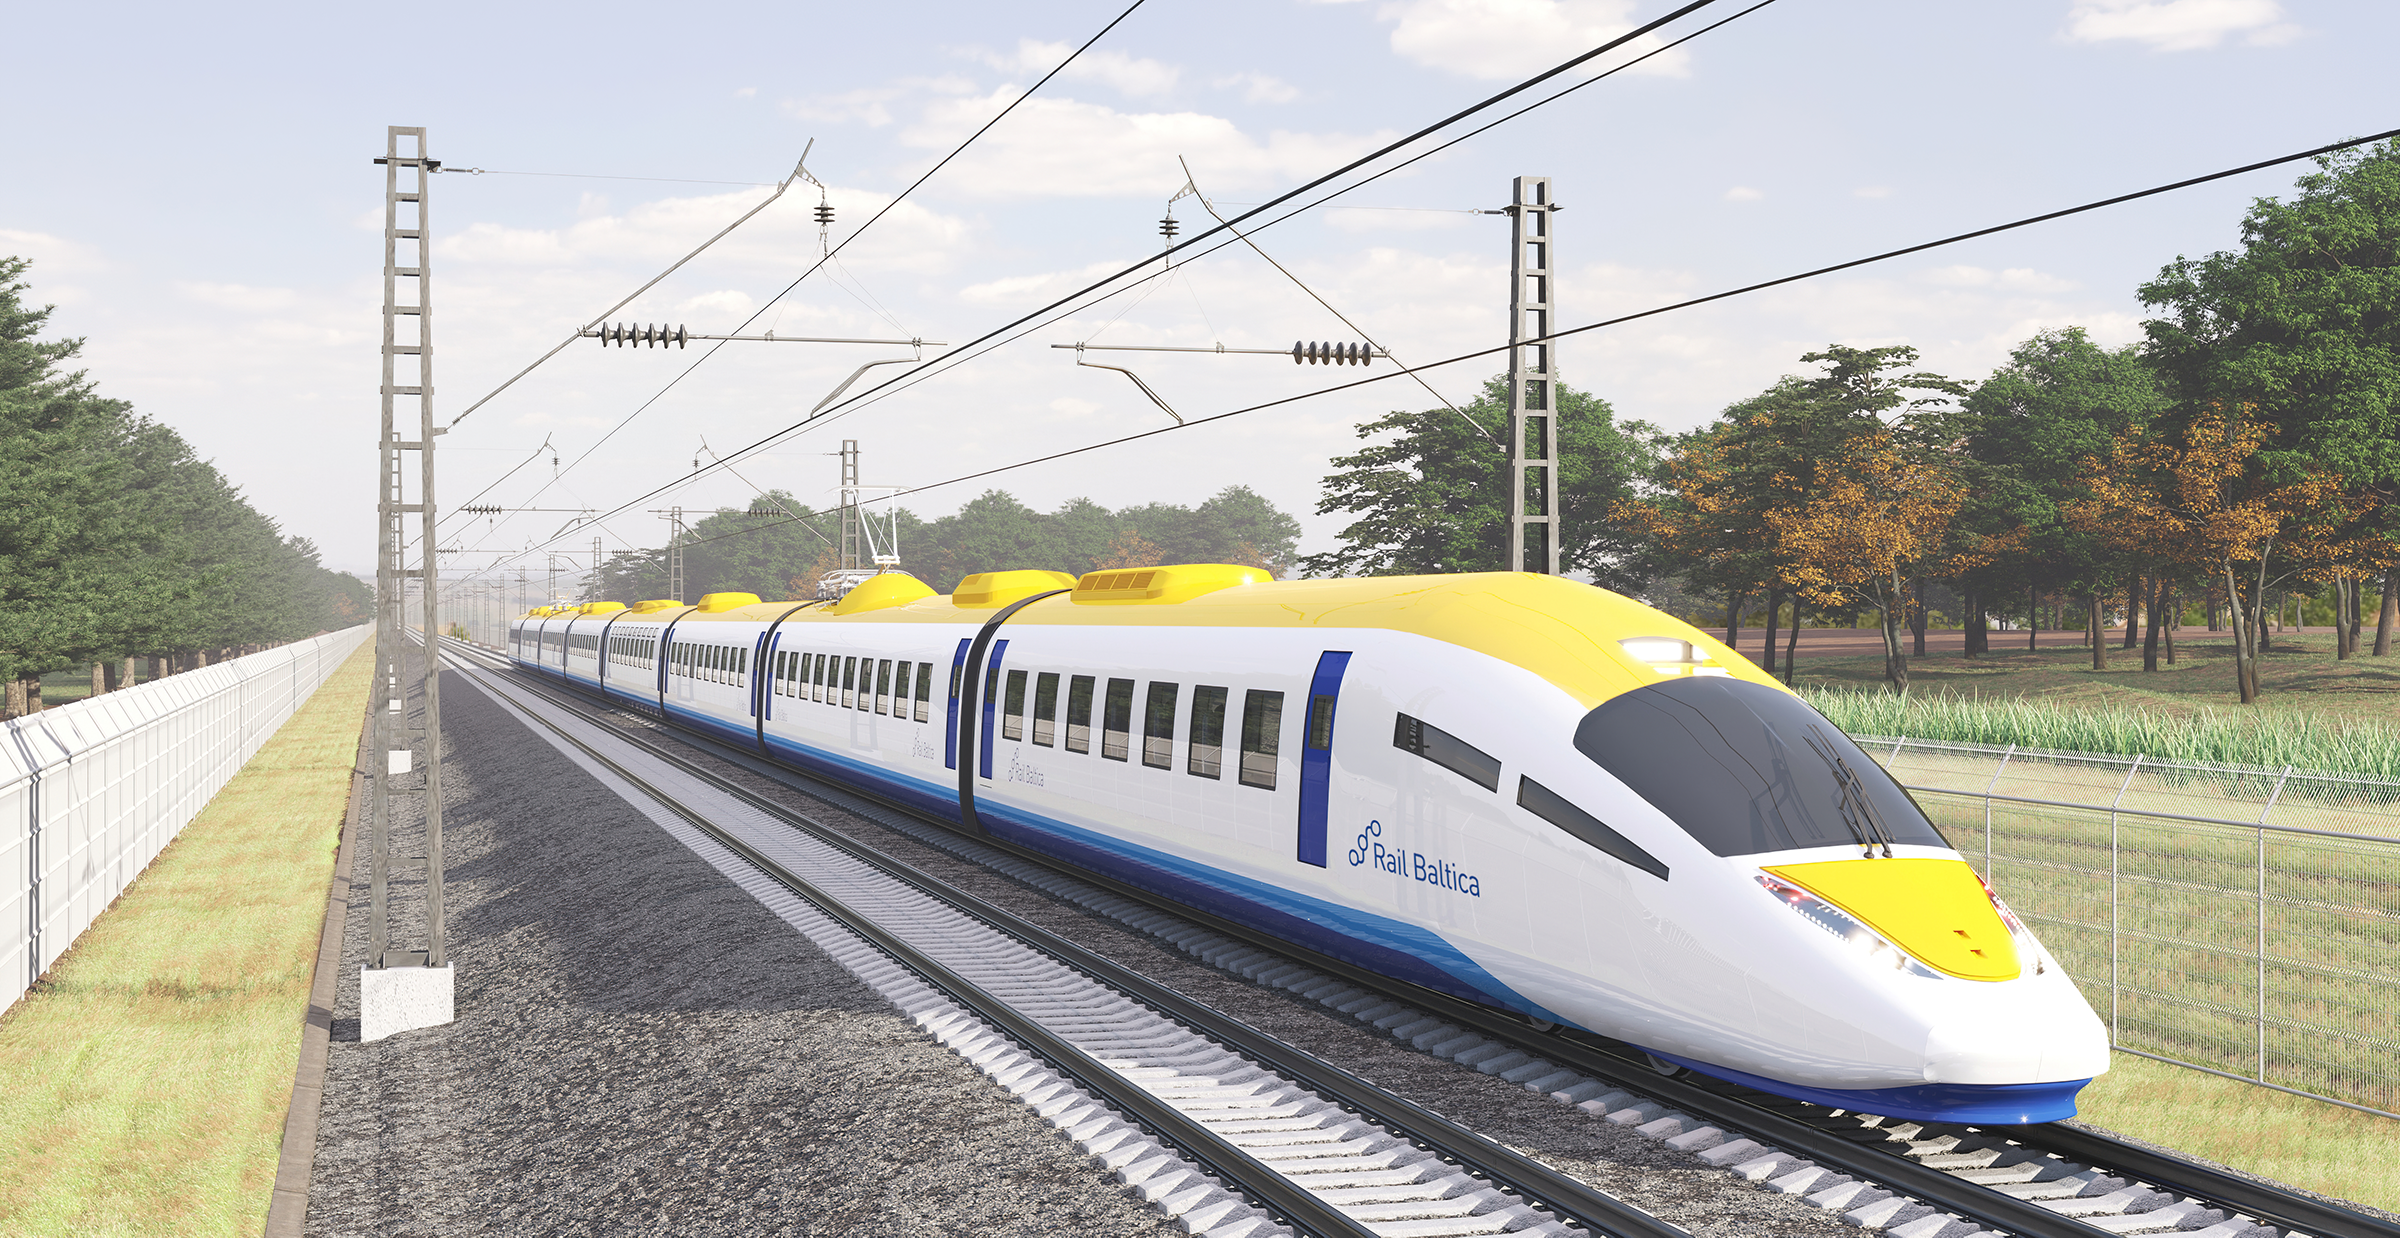 Rail Baltica is the largest railway infrastructure project in the history of the Baltic States, which will see the construction of an electrified, European-standard double-track railway linking Warsaw, Kaunas, Vilnius, Panevėžys, Riga, Perm and Tallinn